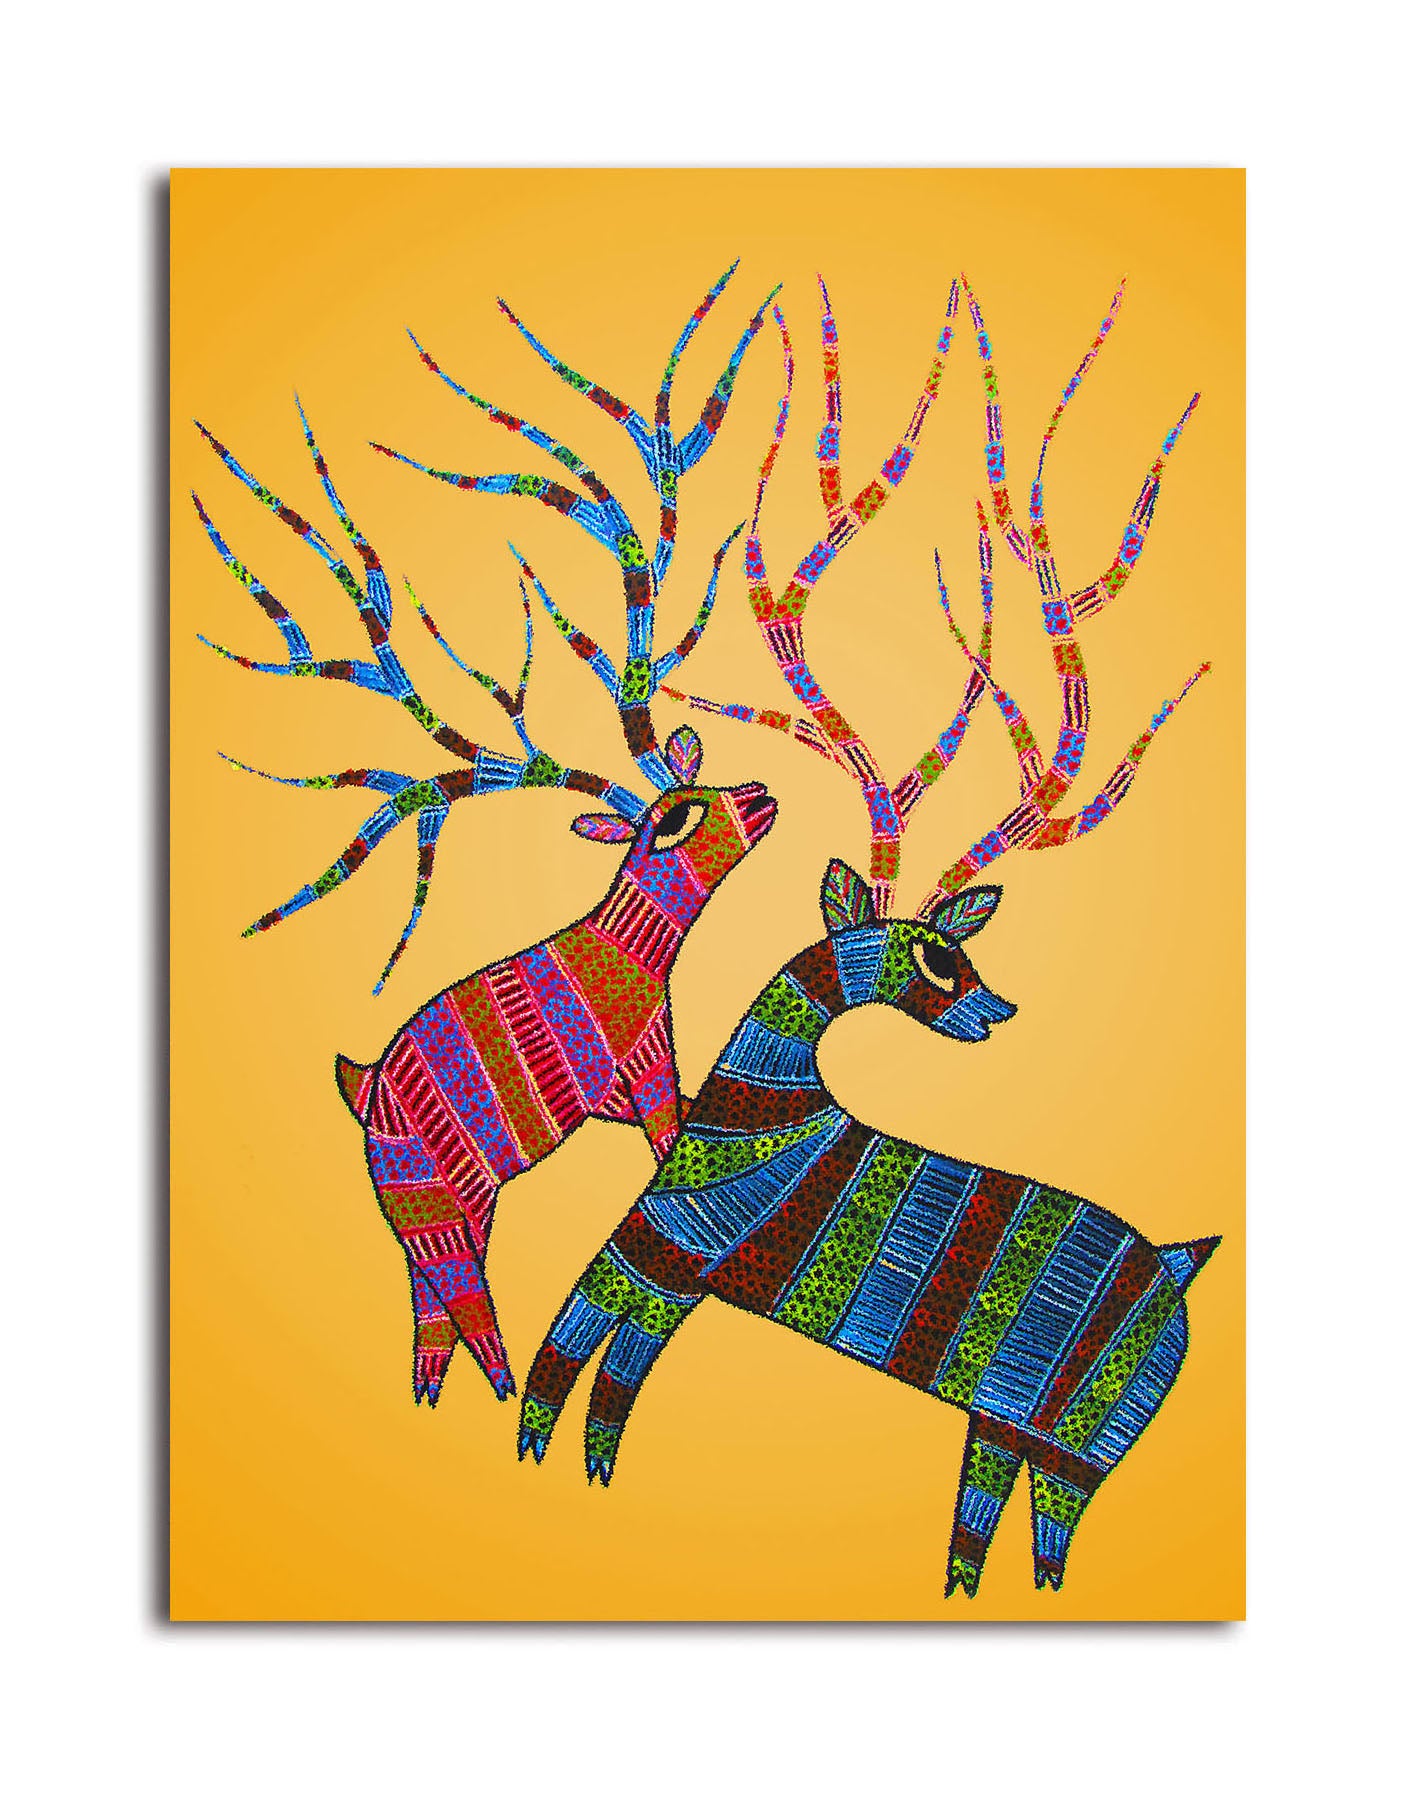 The Deers - Unframed Canvas Painting